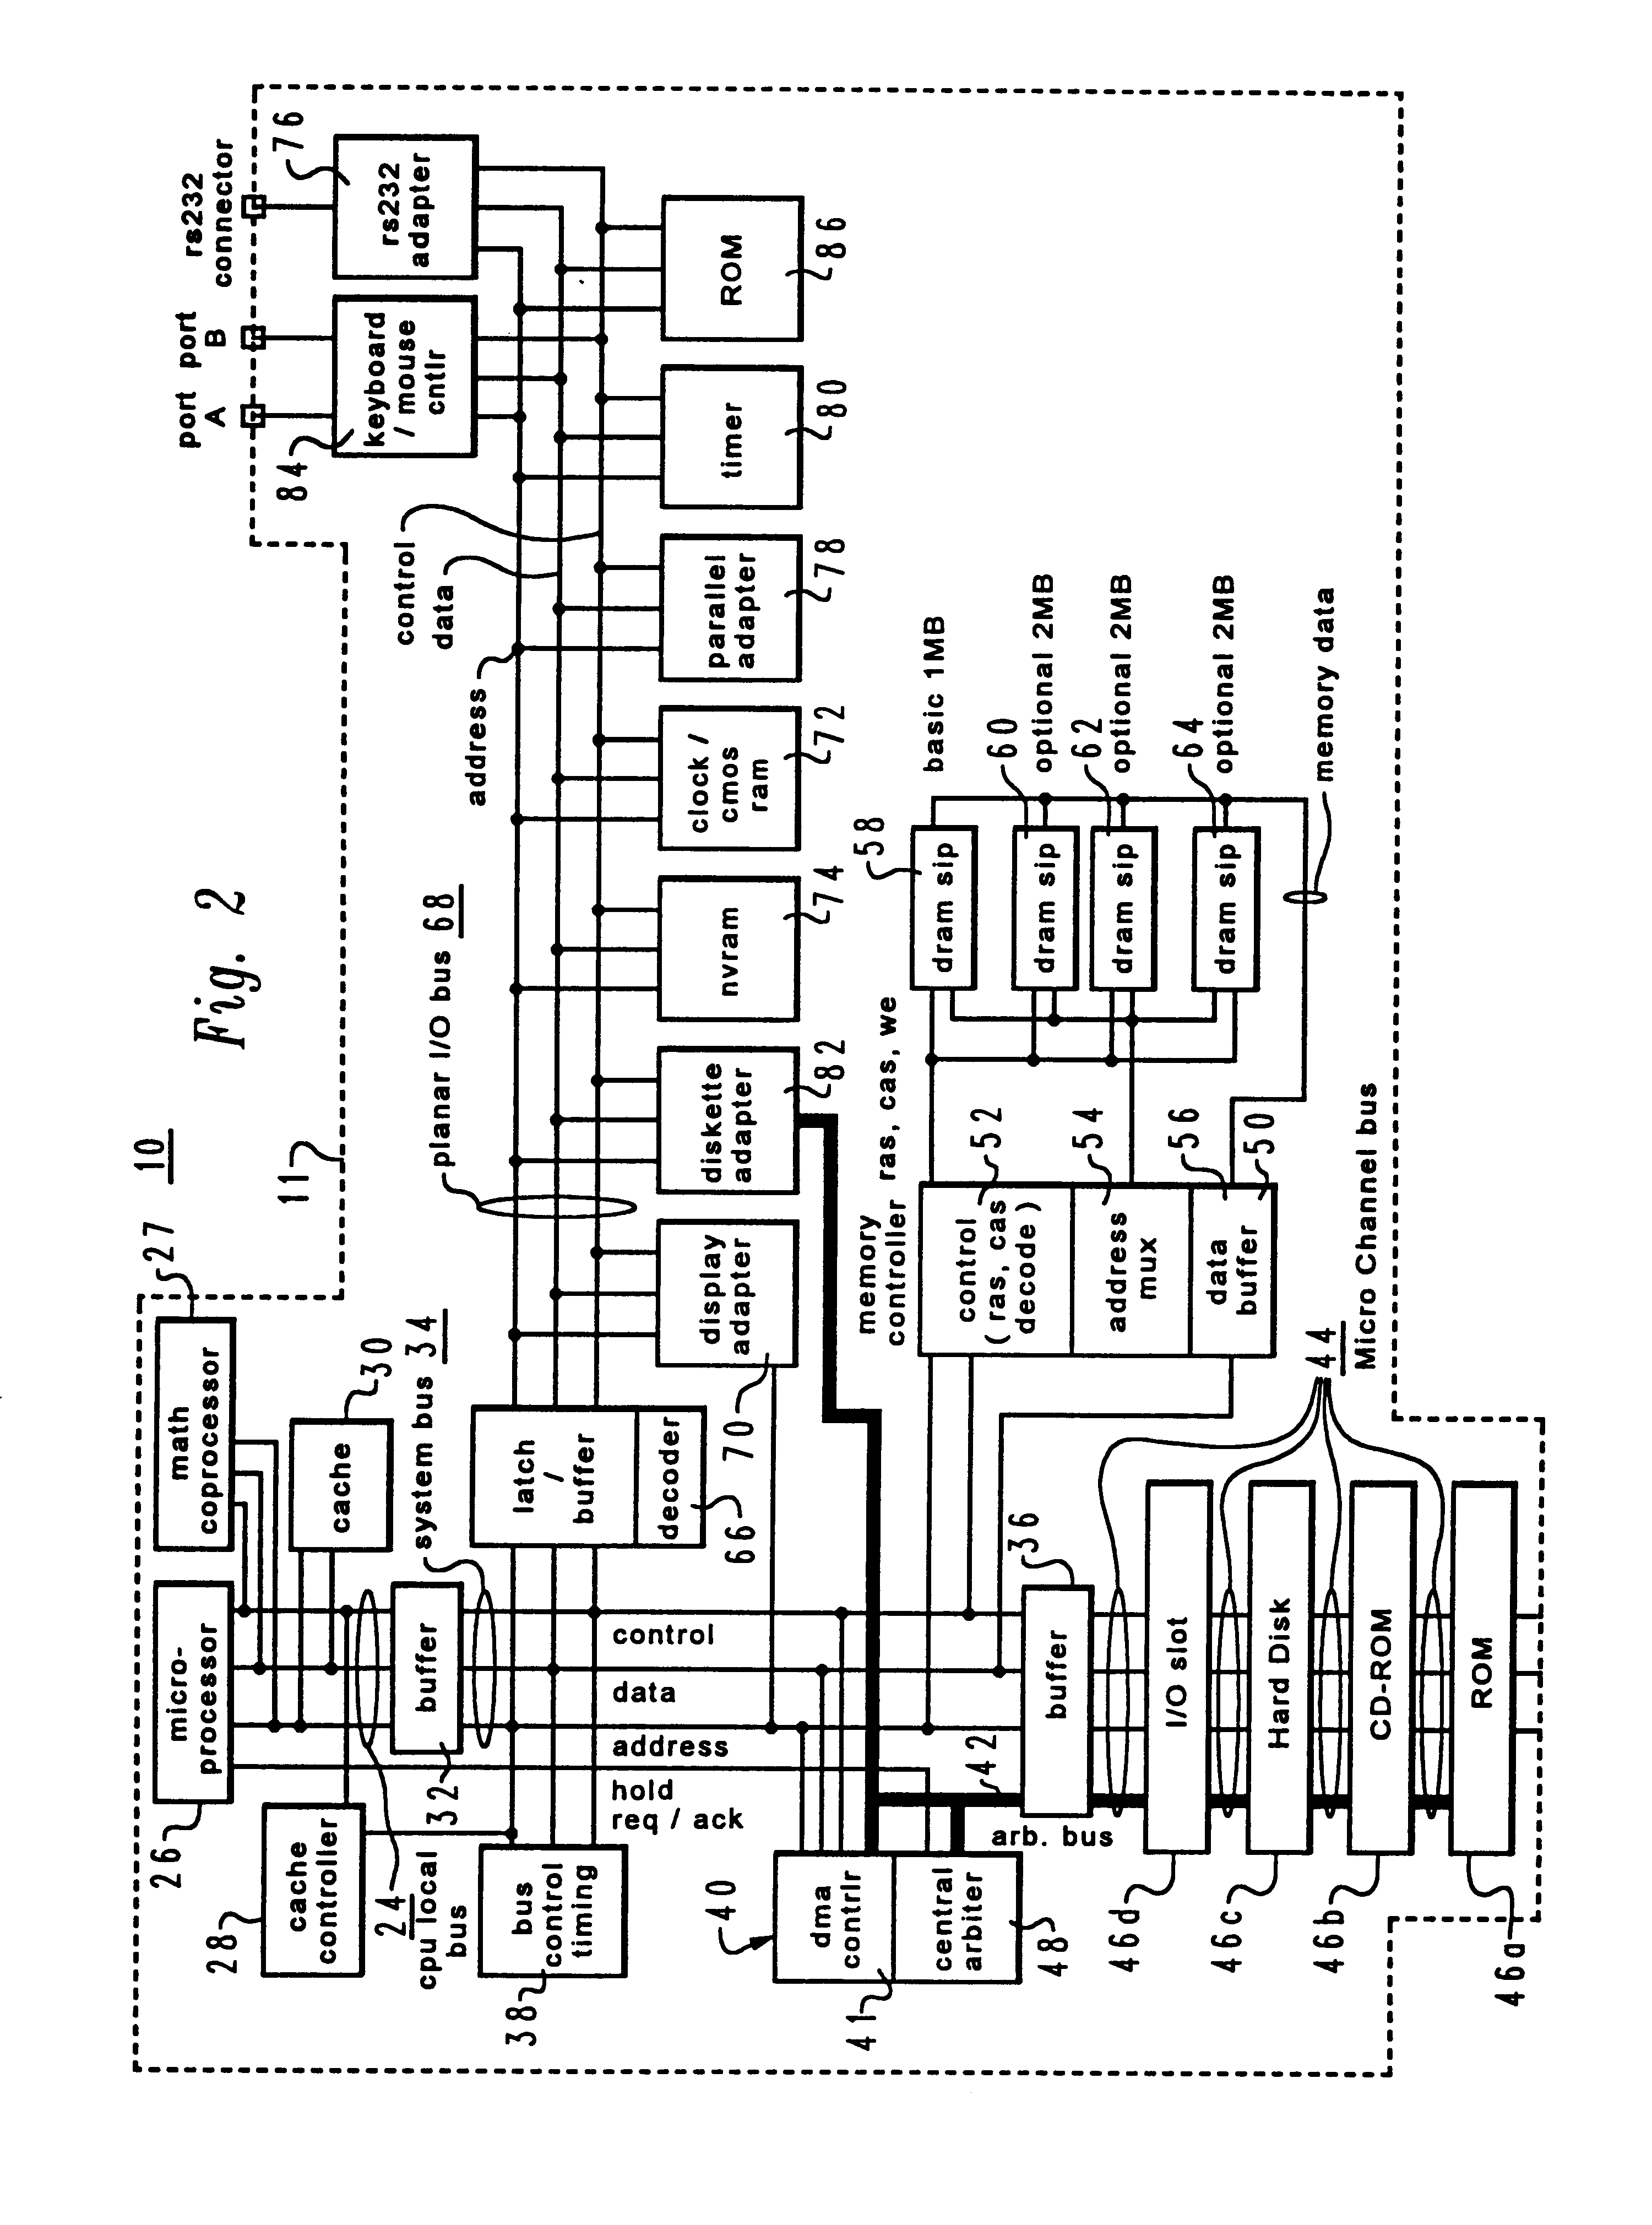 Method and system for logical event management